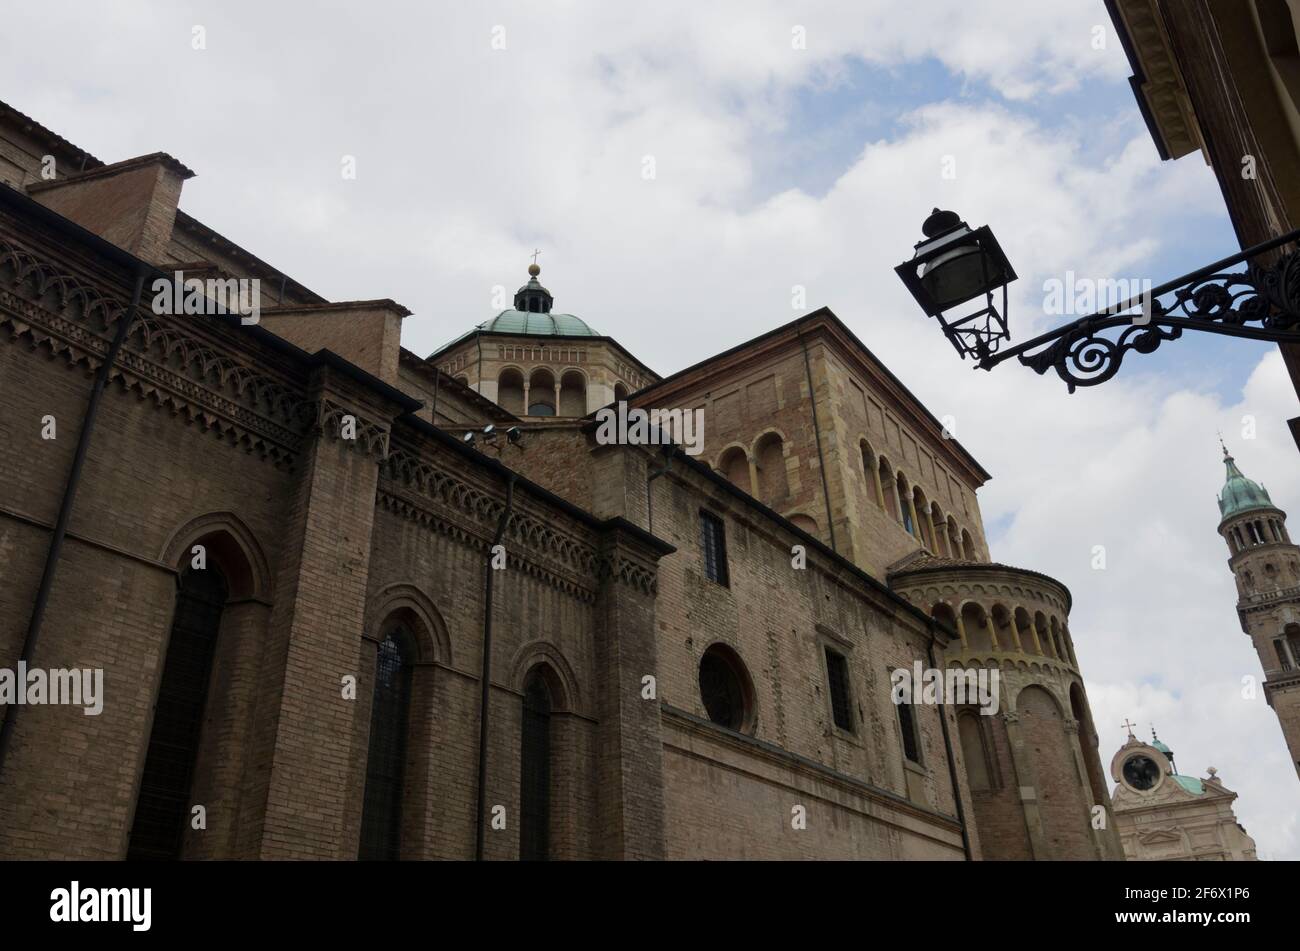 The Duomo (Parma Cathedral) and San Giovanni Evangelista, an abbey church in Parma, Italy. Stock Photo